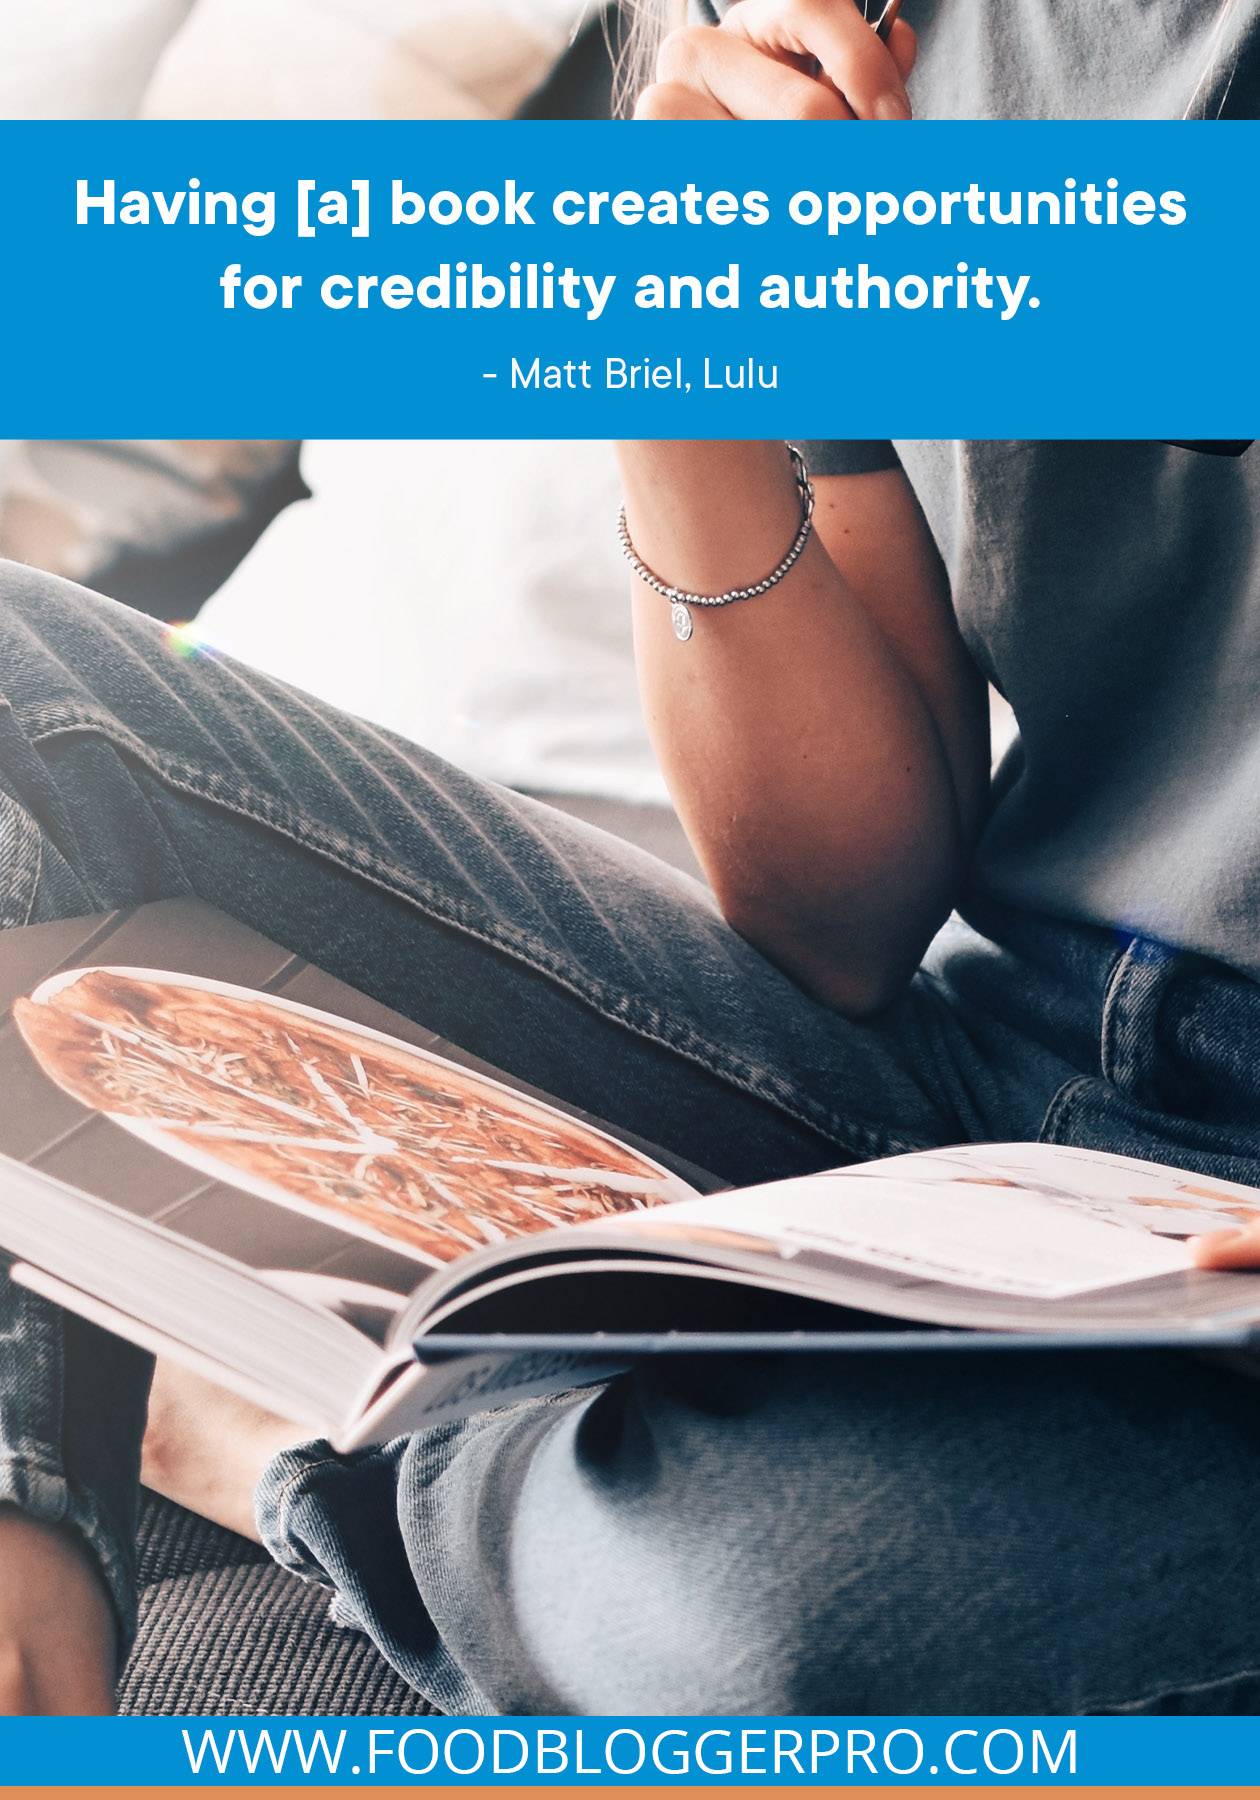 A photograph of a woman reading a cookbook with a quote from Matt Briel's episode of The Food Blogger Pro Podcast: "Having [a] book creates opportunities for credibility and authority."